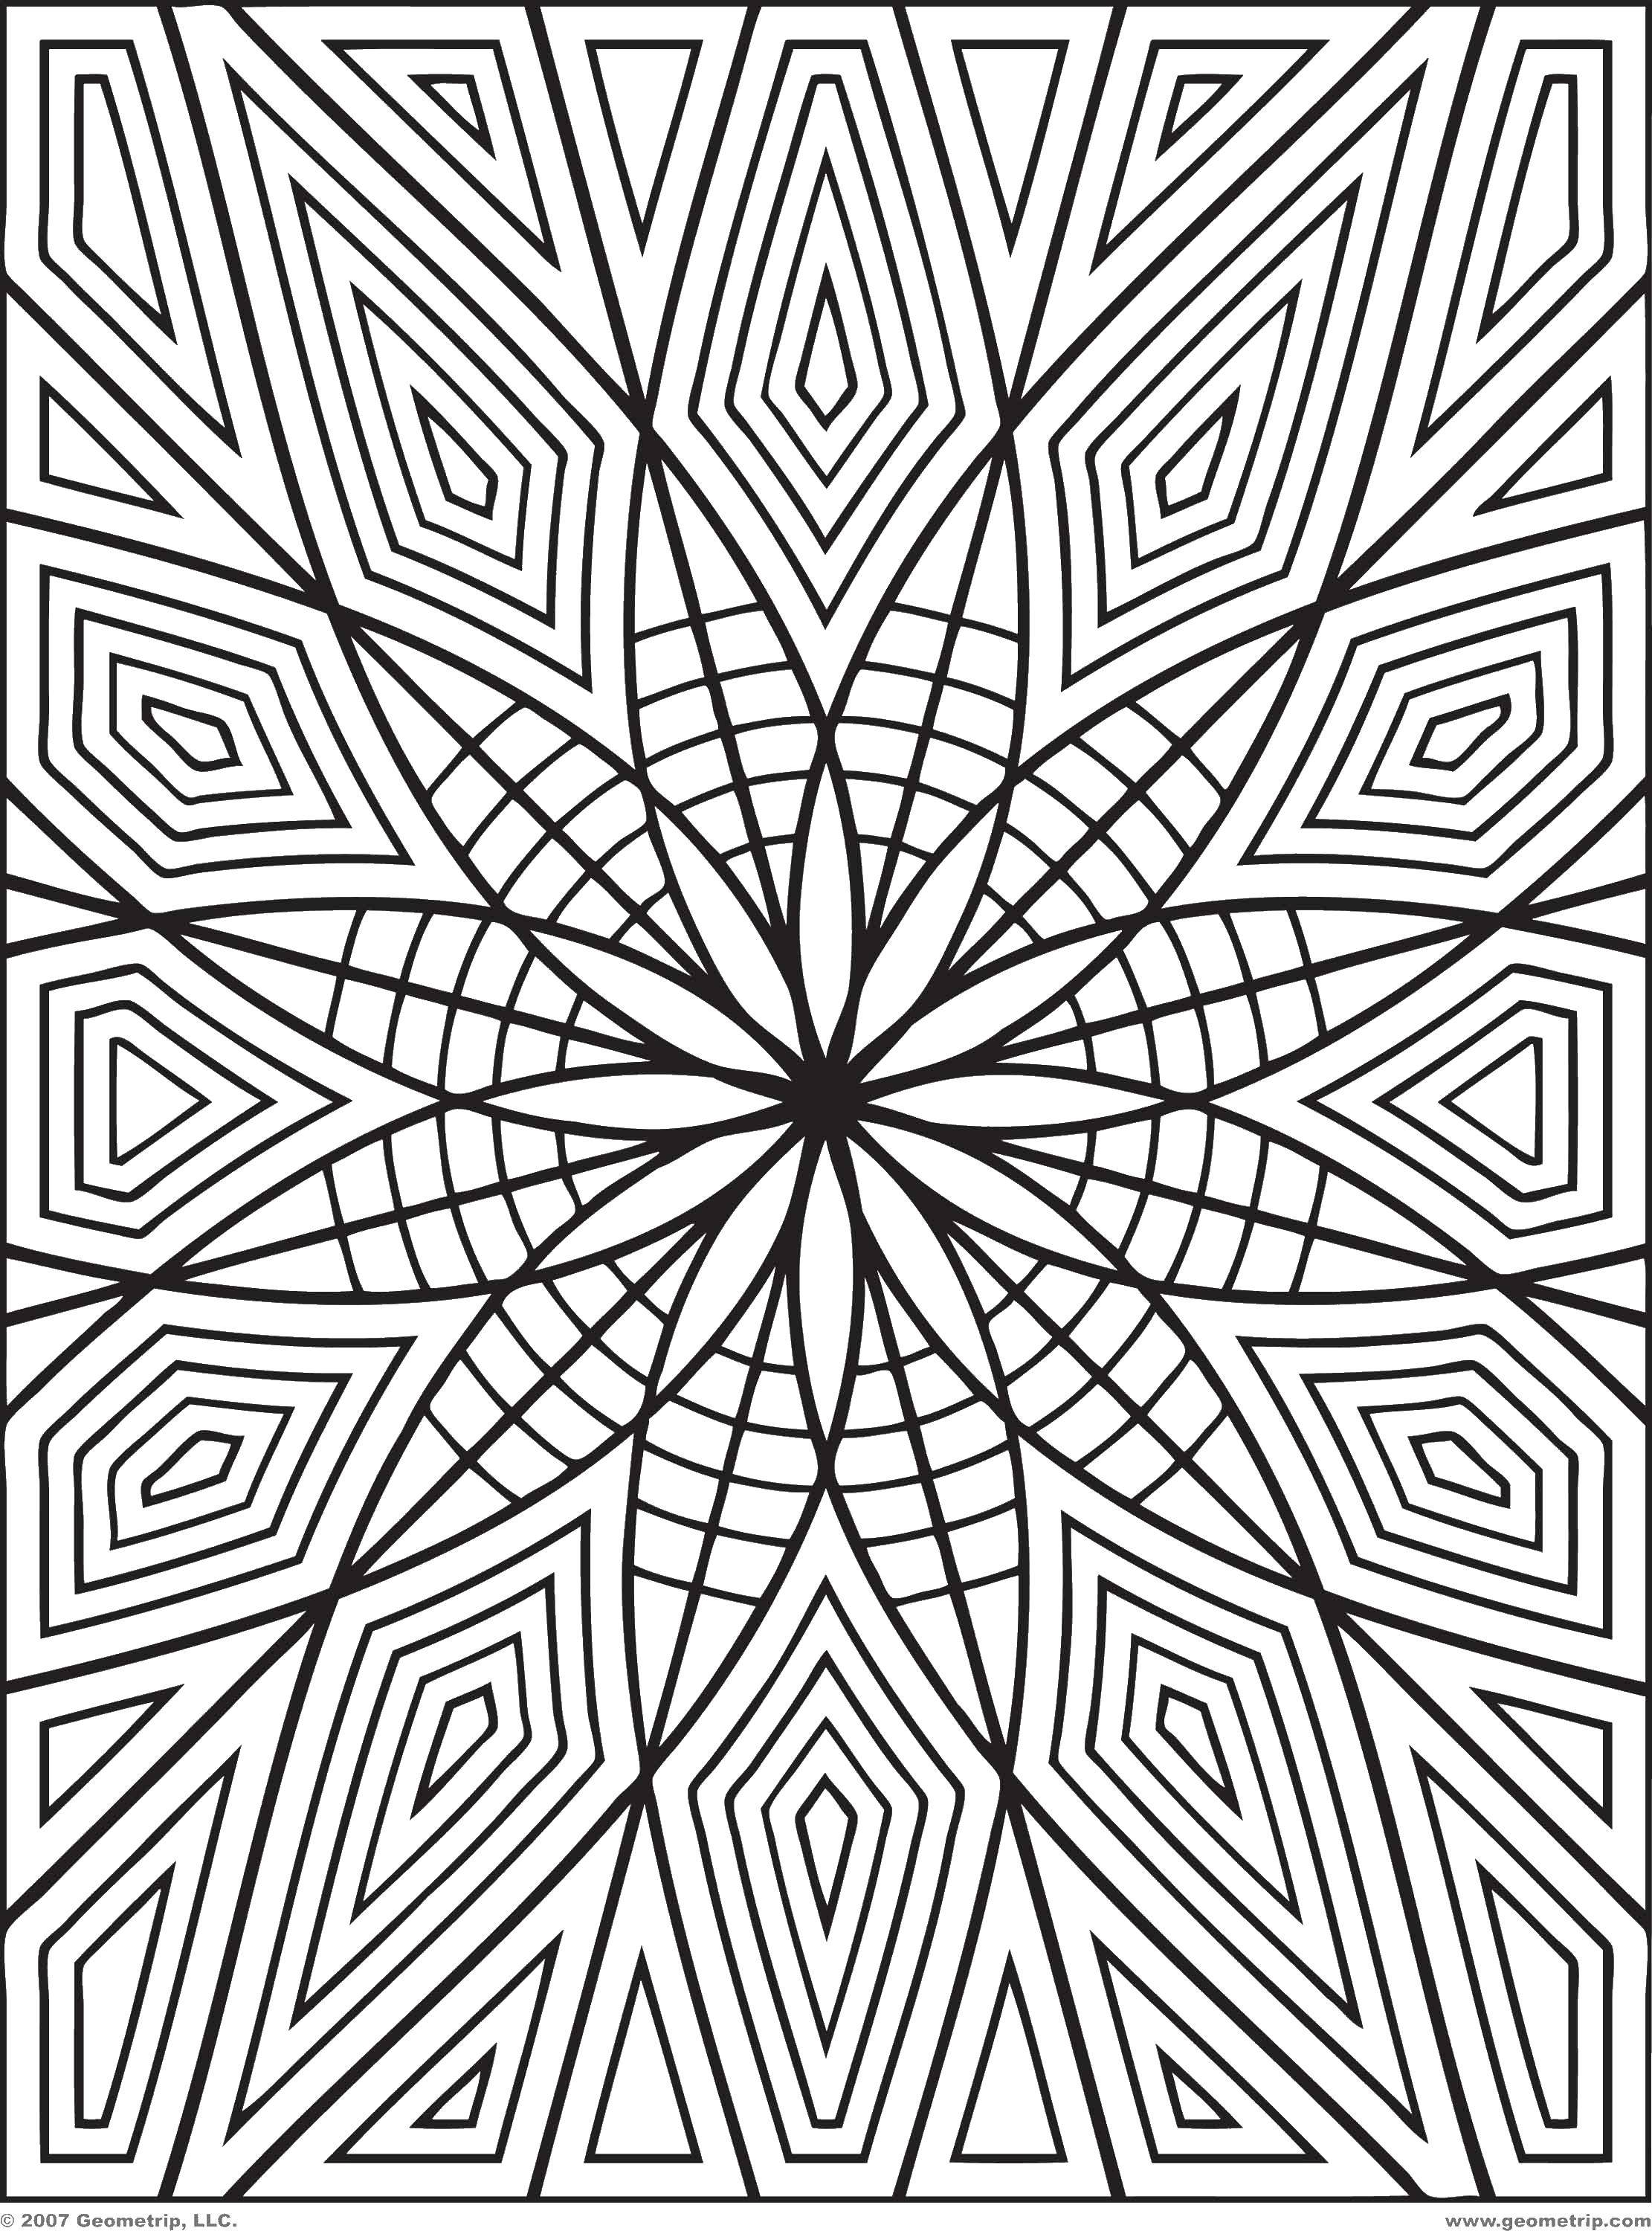 Coloring Geometric shapes and patterns. Category With geometric shapes. Tags:  Patterns, geometric.